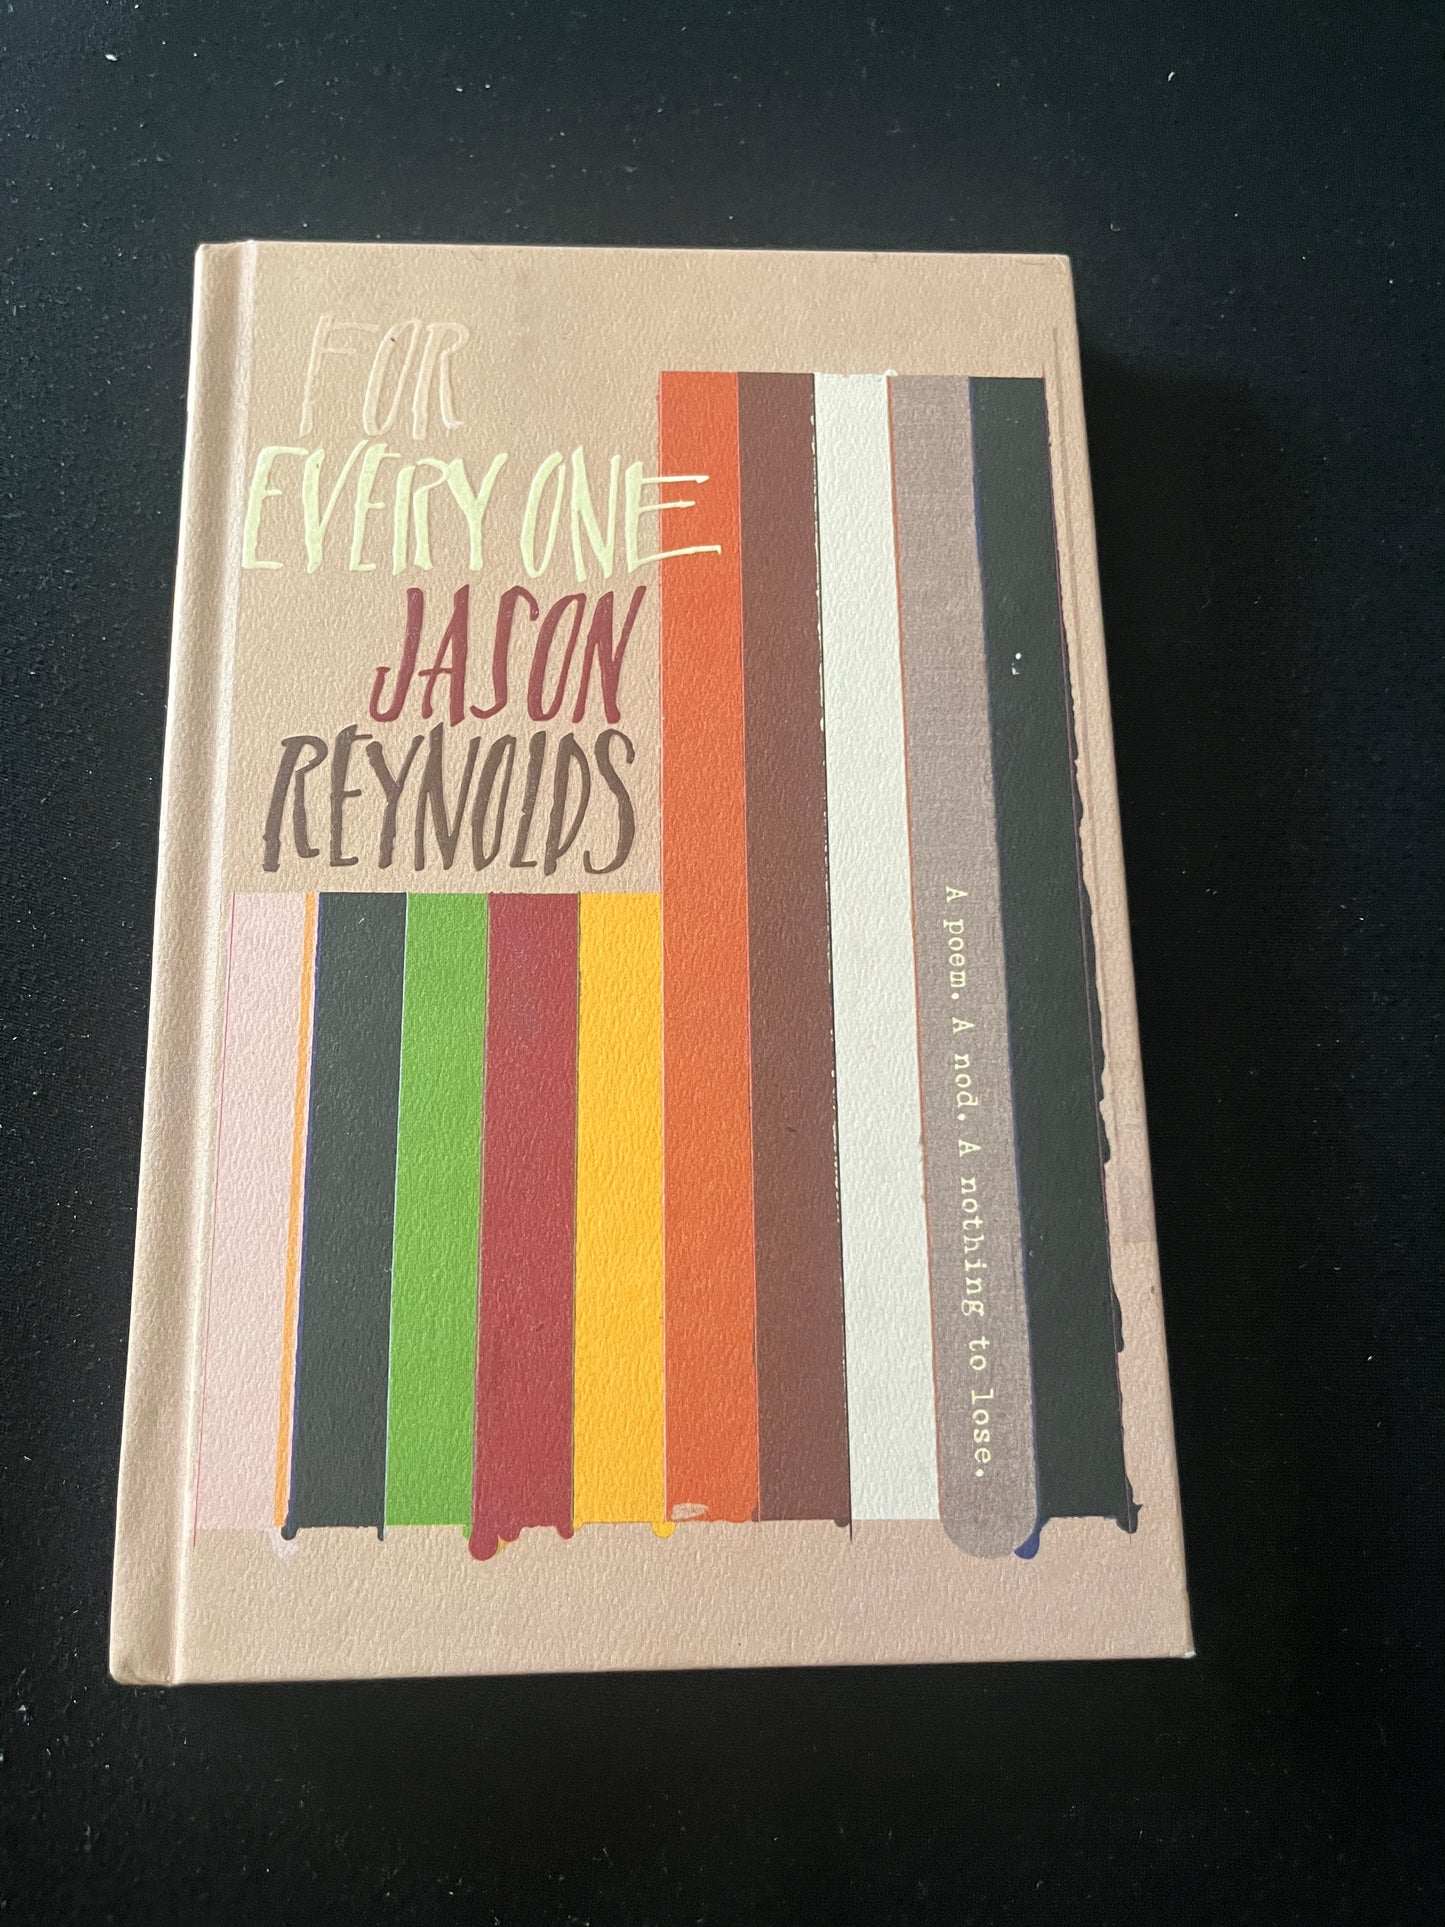 FOR EVERYONE by Jason Reynolds